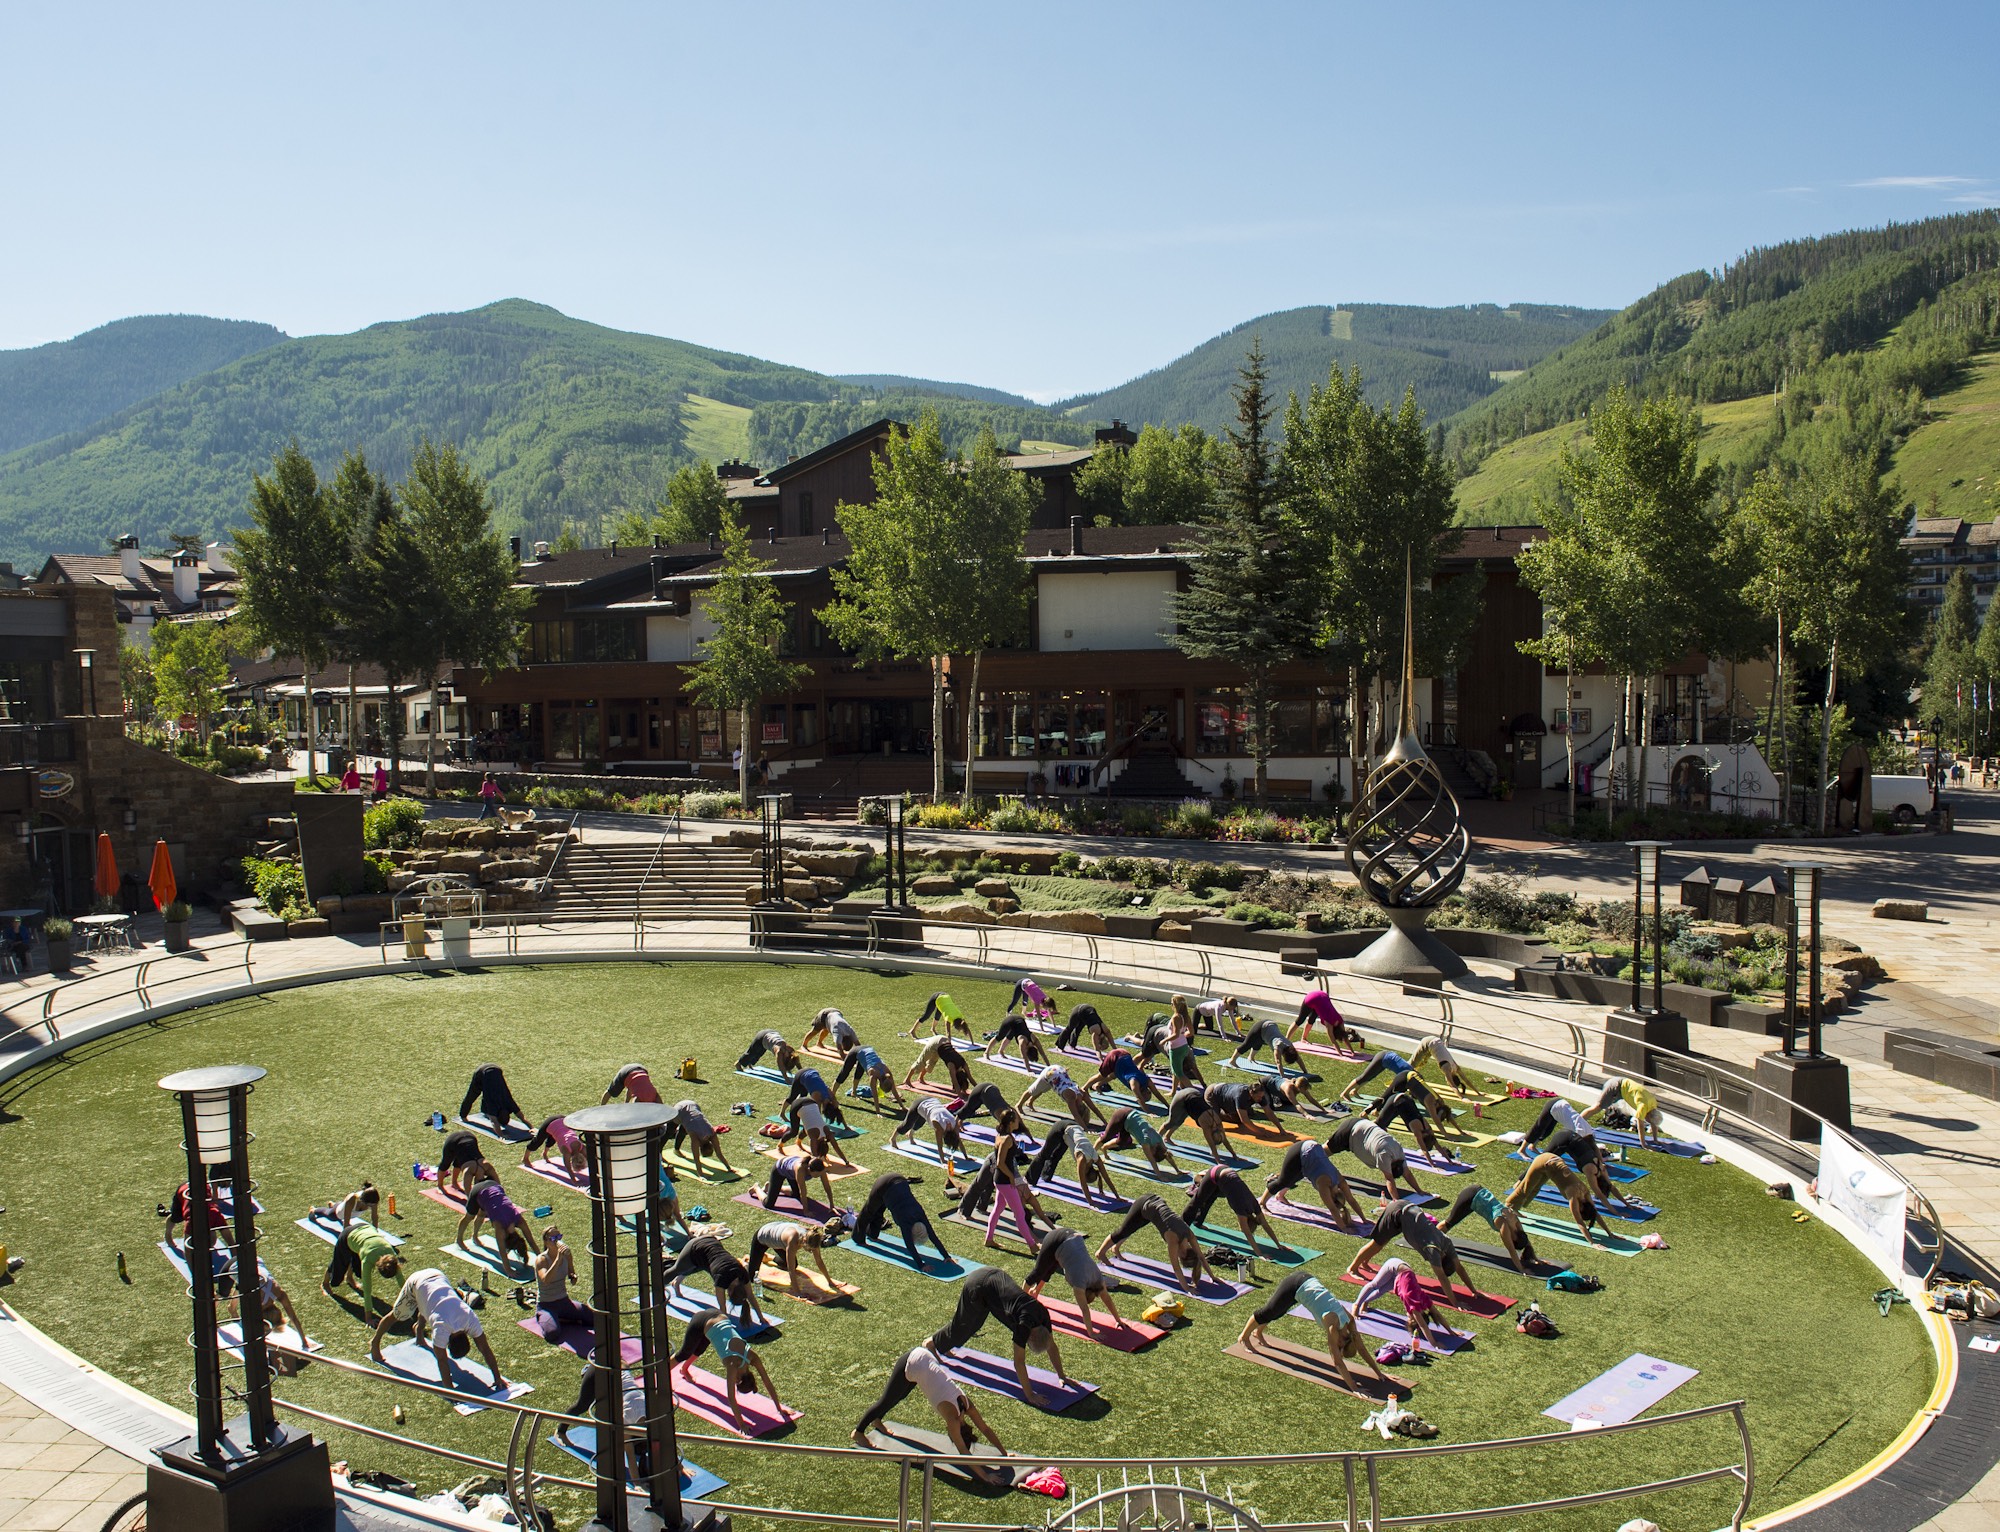 Free community yoga at The Solaris in Vail this summer